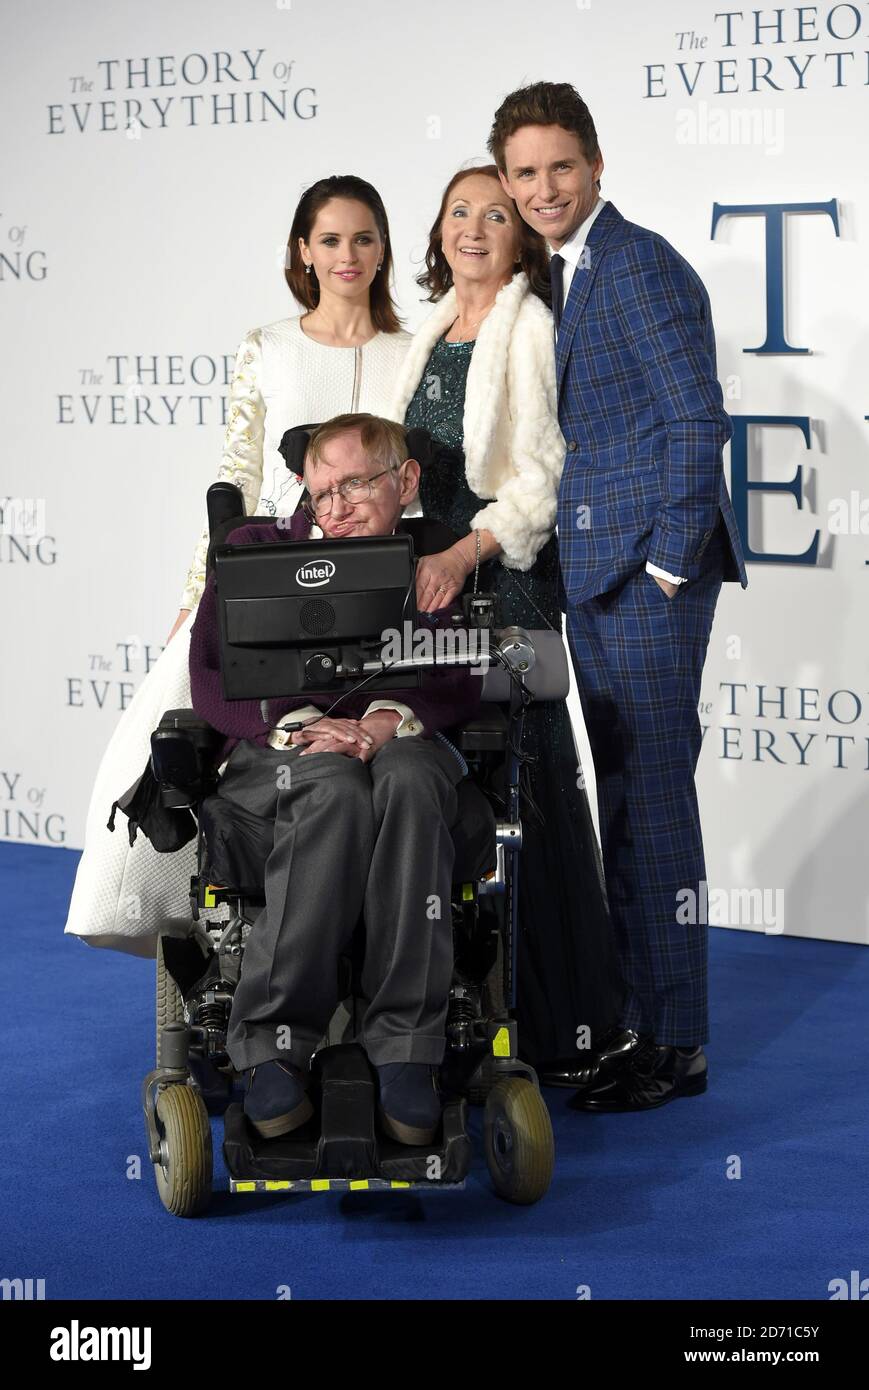 Eddie Redmayne, Felicity Jones, Stephen Hawking and Jane Wilde Hawking arriving at the Theory Of Everything UK Premiere held at Odeon Leicester Square, London Stock Photo